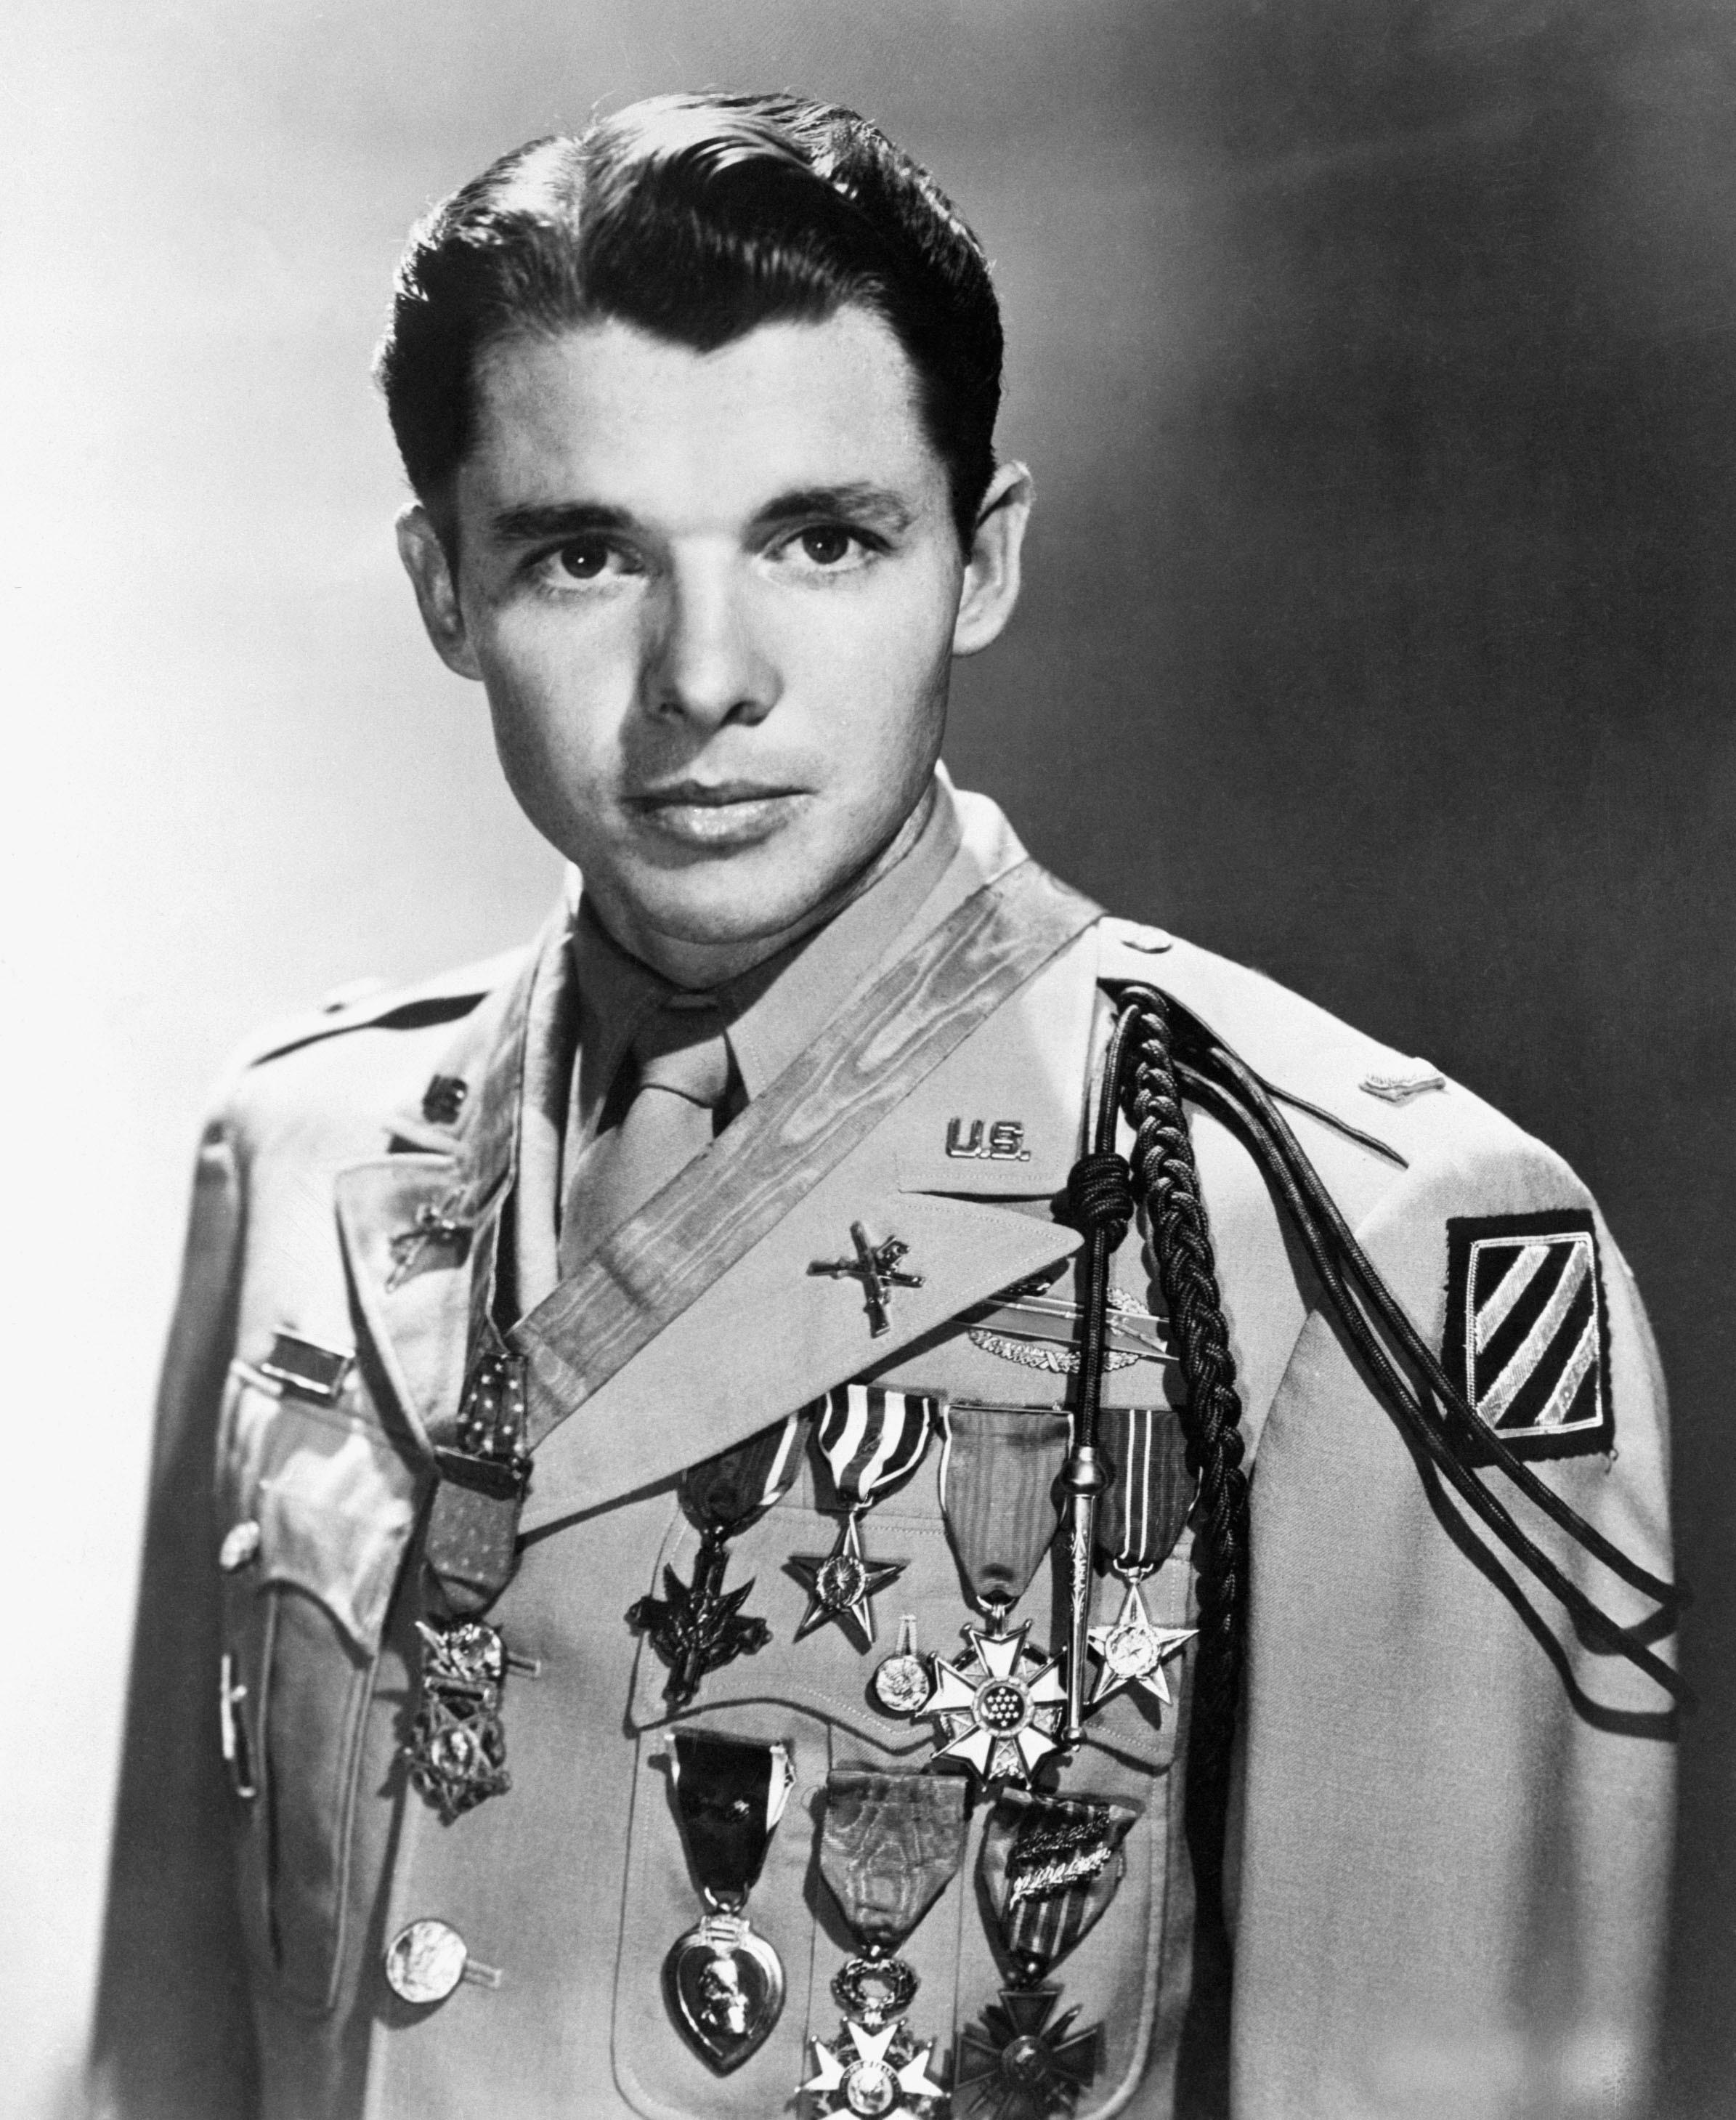 Original Caption: 1950-Film star Audie Murphy, World War II's most decorated hero, will train with Texas' famed 36th National Guard Infantry for possible action in Korea. Murphy received a Captain's commission of intelligence in 36th Division unit at Austin, TX., and will train with the Division at Fort Hood, TX. Murphy is officially credited with killing, capturing or wounding 240 Germans during World War II. He received a battle field commision as a lieutenant and every citation the Army awards plus the Congressional Medal of Honor. BPA2# 389